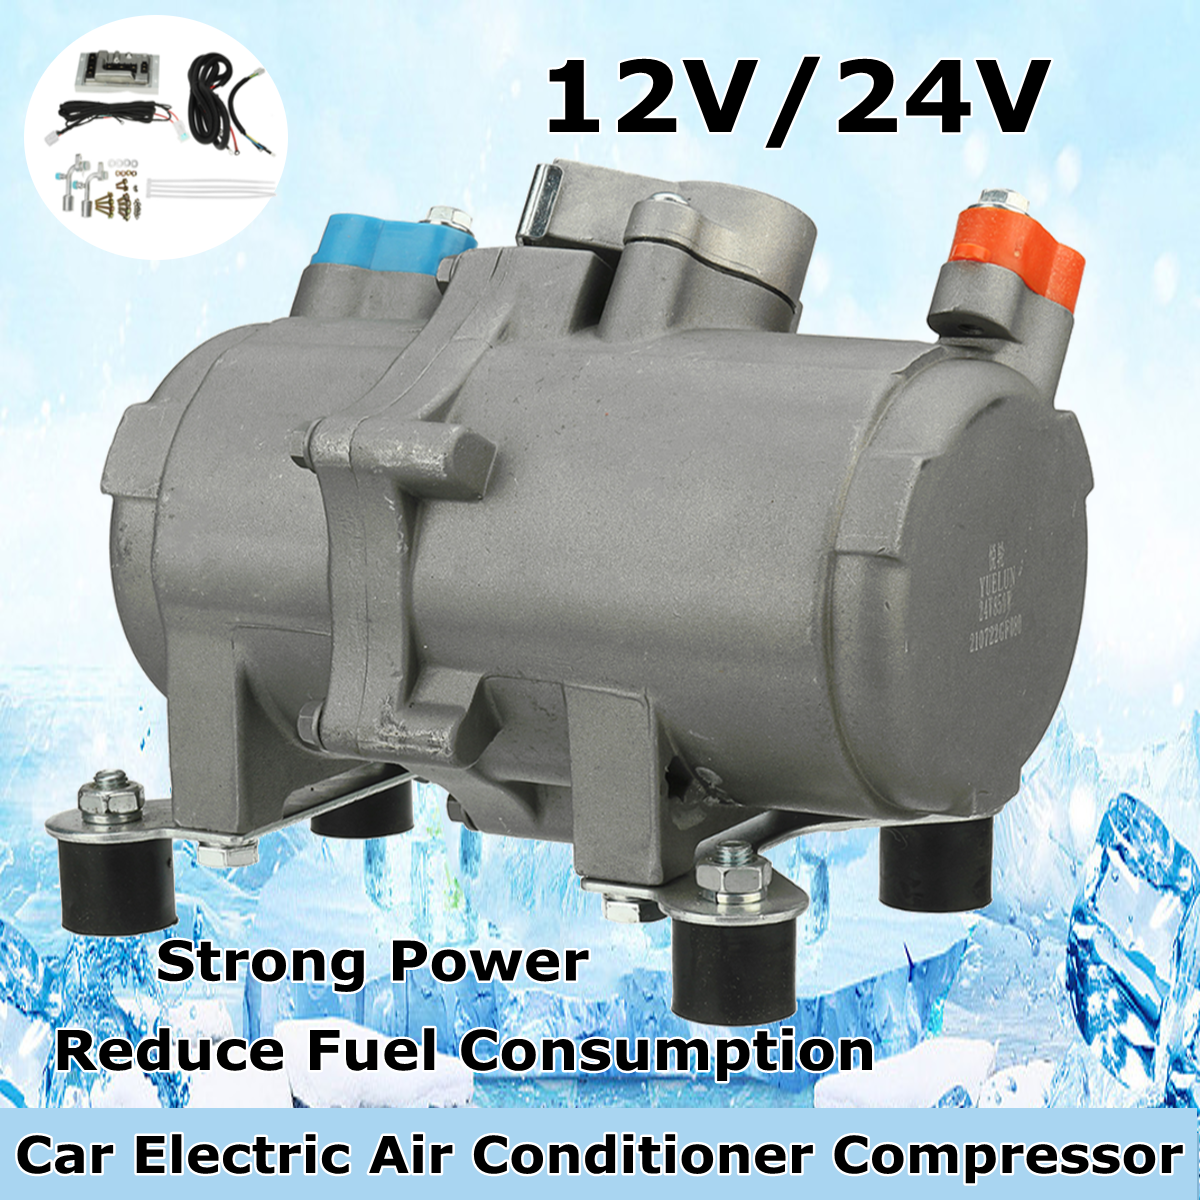 L32-Car-Air-Conditioner-strong-power